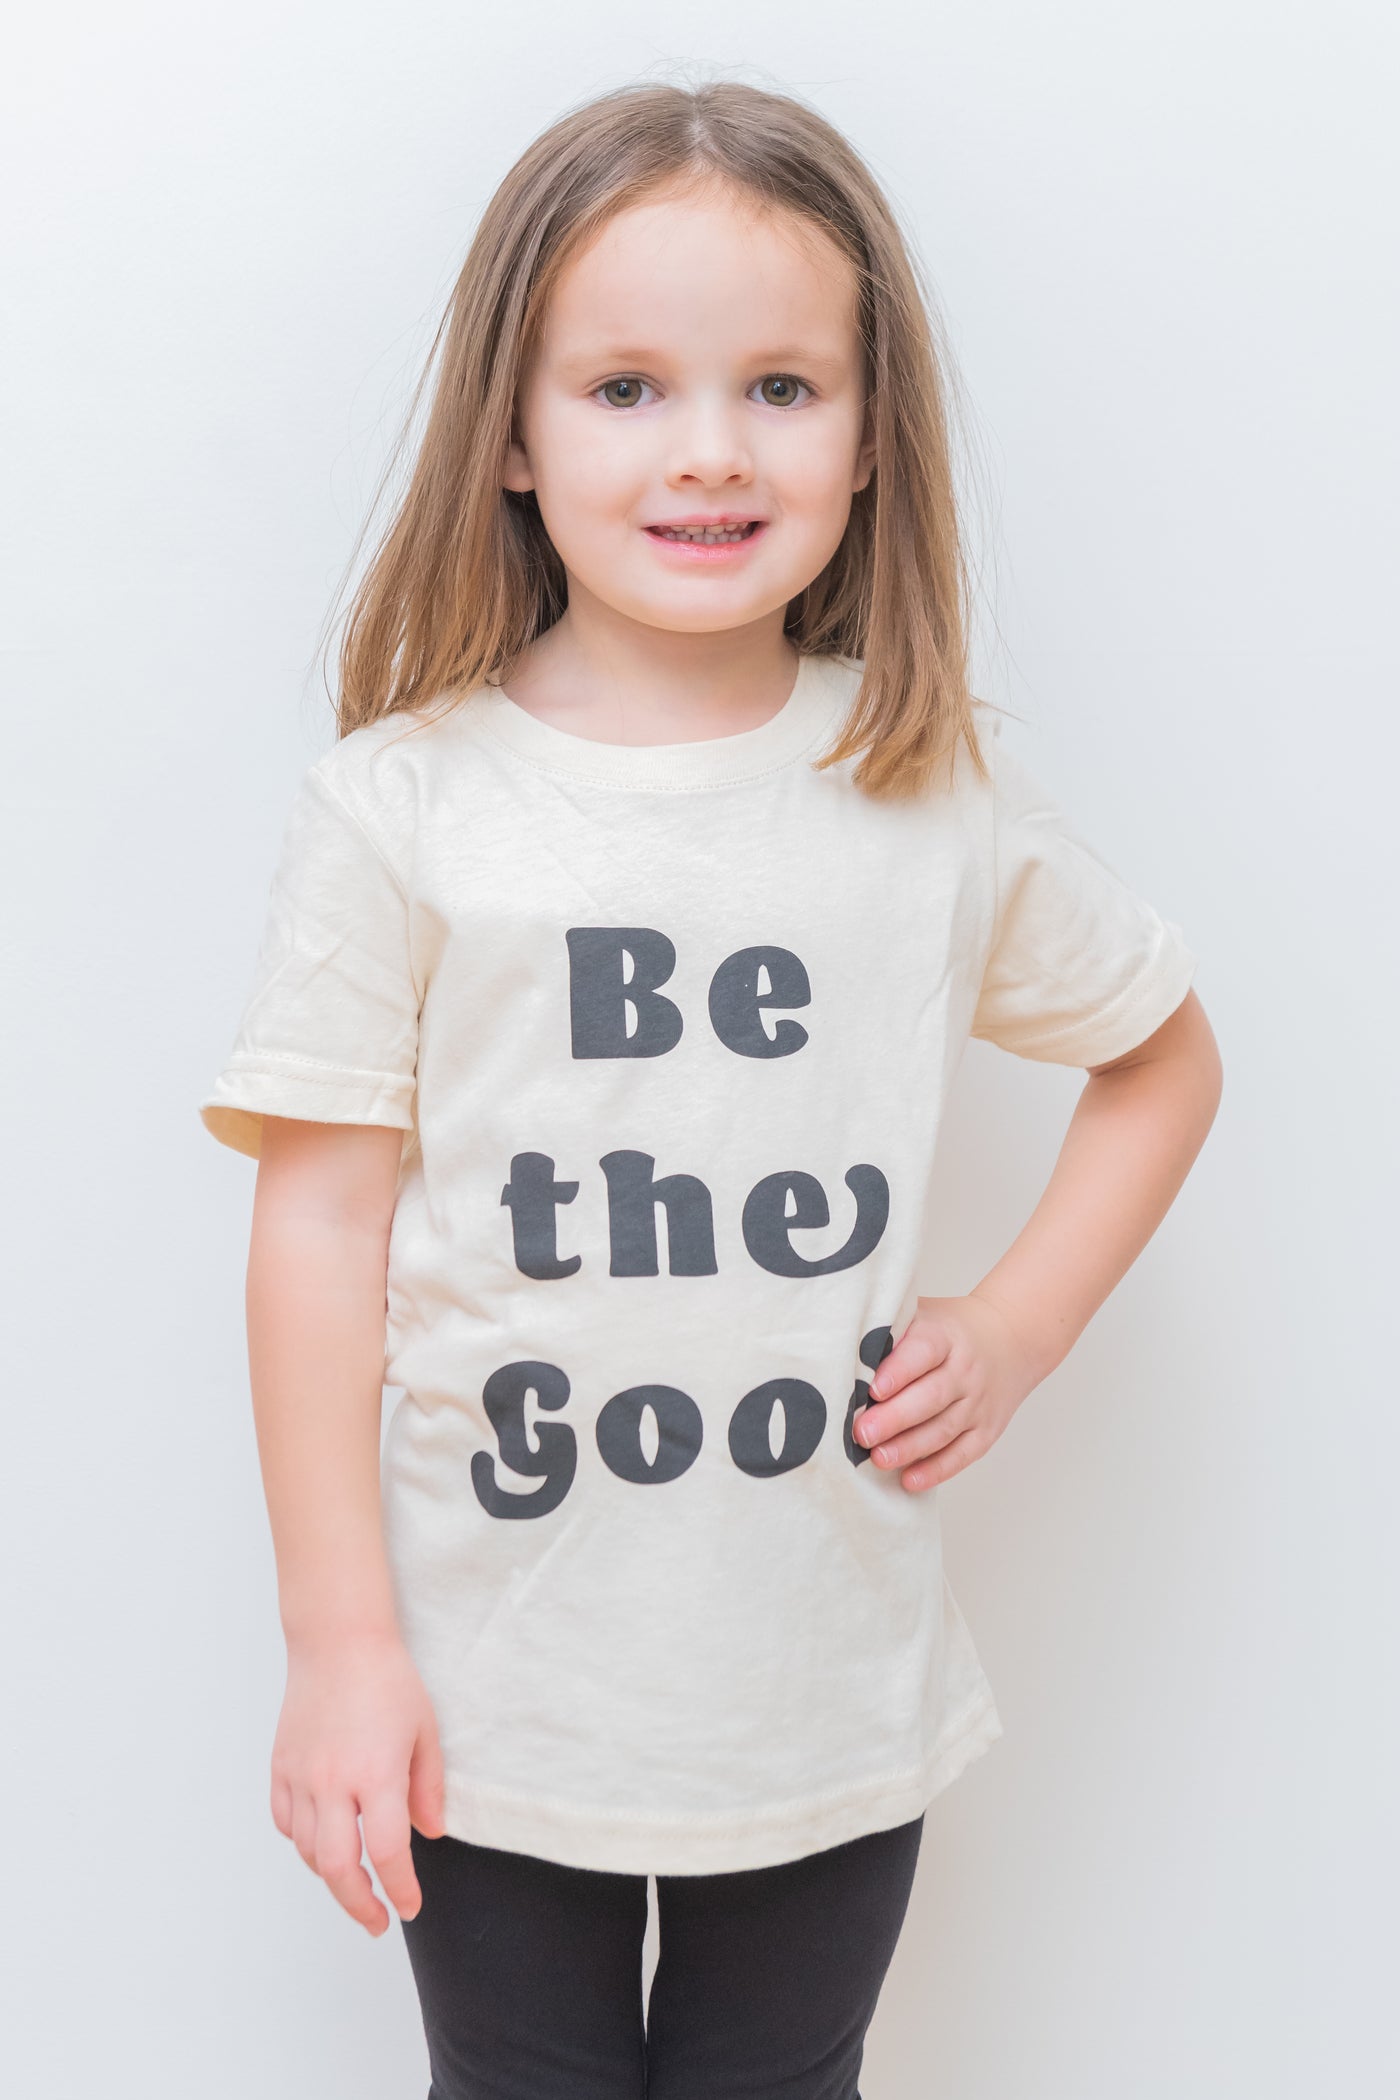 Be The Good Tee Kids/Toddler (2T, 3T, 4T)